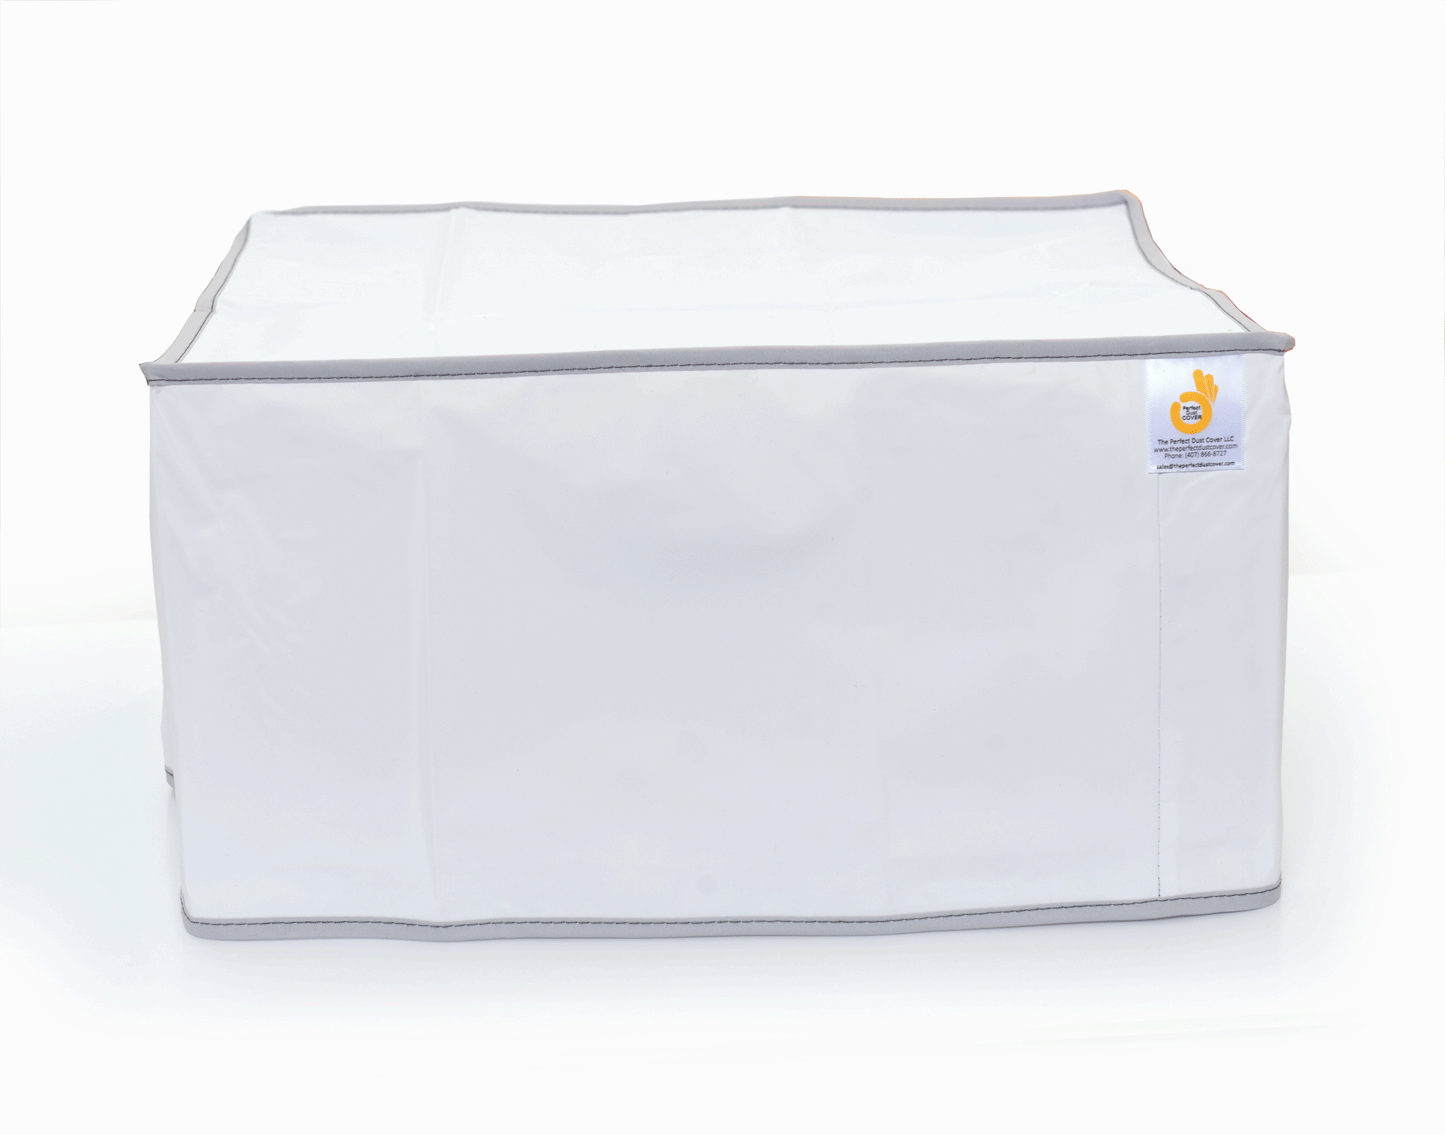 The Perfect Dust Cover, White Nylon Cover Compatible with Kyocera ECOSYS M3645idn Monochrome Multifunction Printer, Anti-Static, Double Stitched and Waterproof Dust Cover Dimensions 18.8''W x 18.8''D x 22.7''H by The Perfect Dust Cover LLC